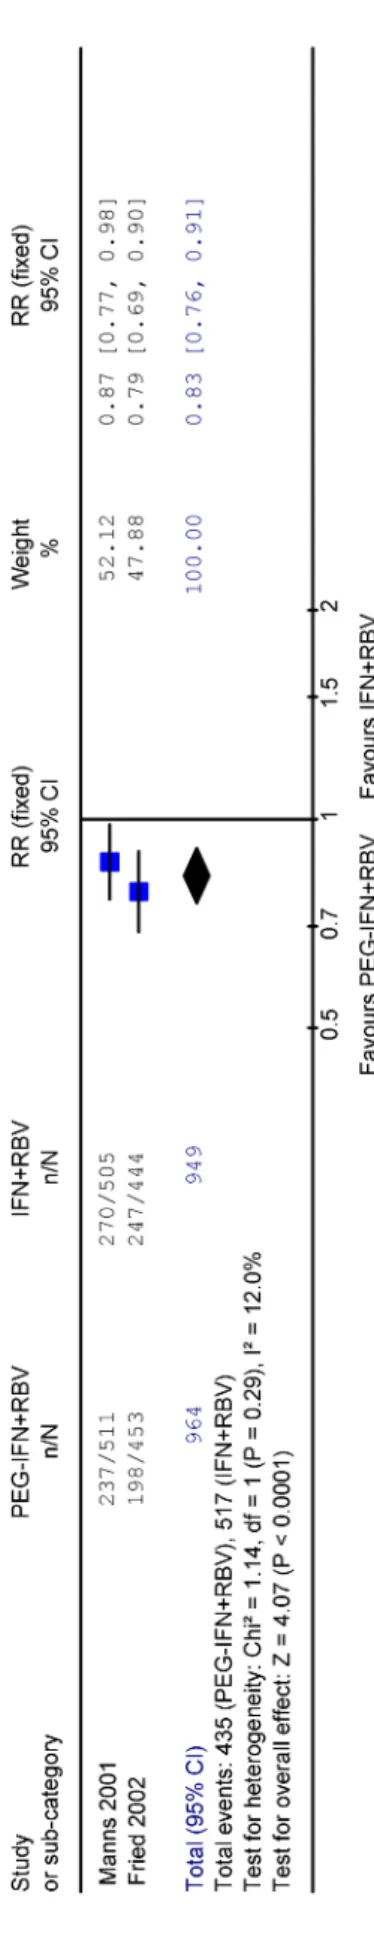 Figure 1: Meta-analysis: Forest Plot and pooled relative risk (RR) for no sustained virological response (SVR) for peginterferon plus ribavirin (PEG-IFN+RBV) versus interferon